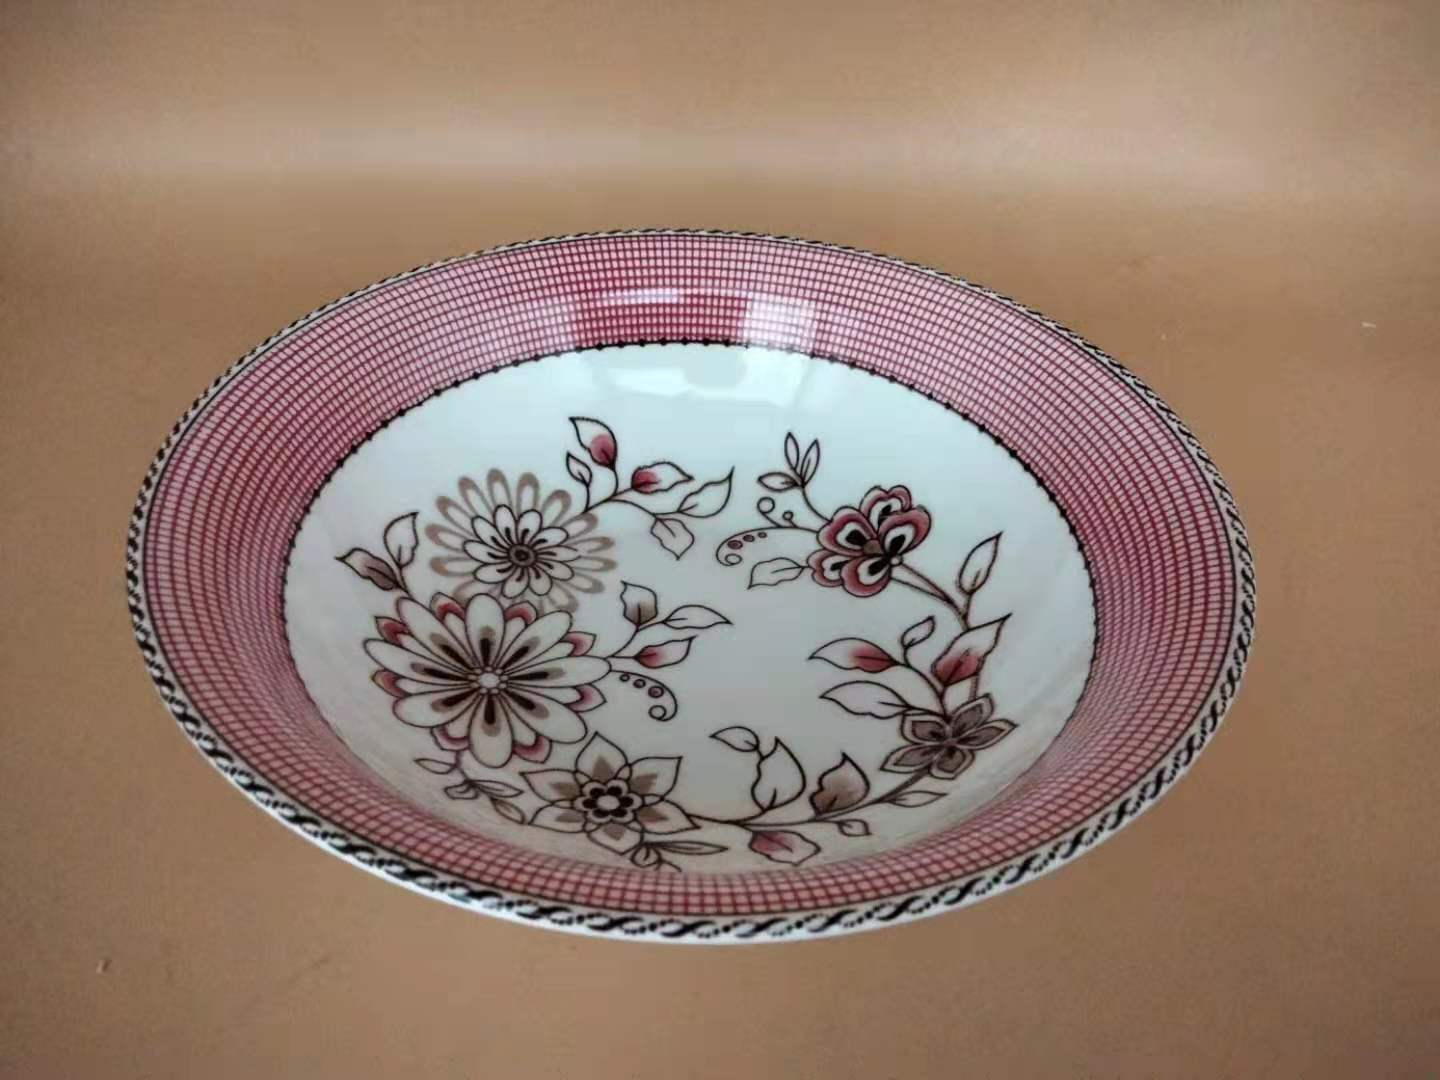 Flower ceramic plate and bowl